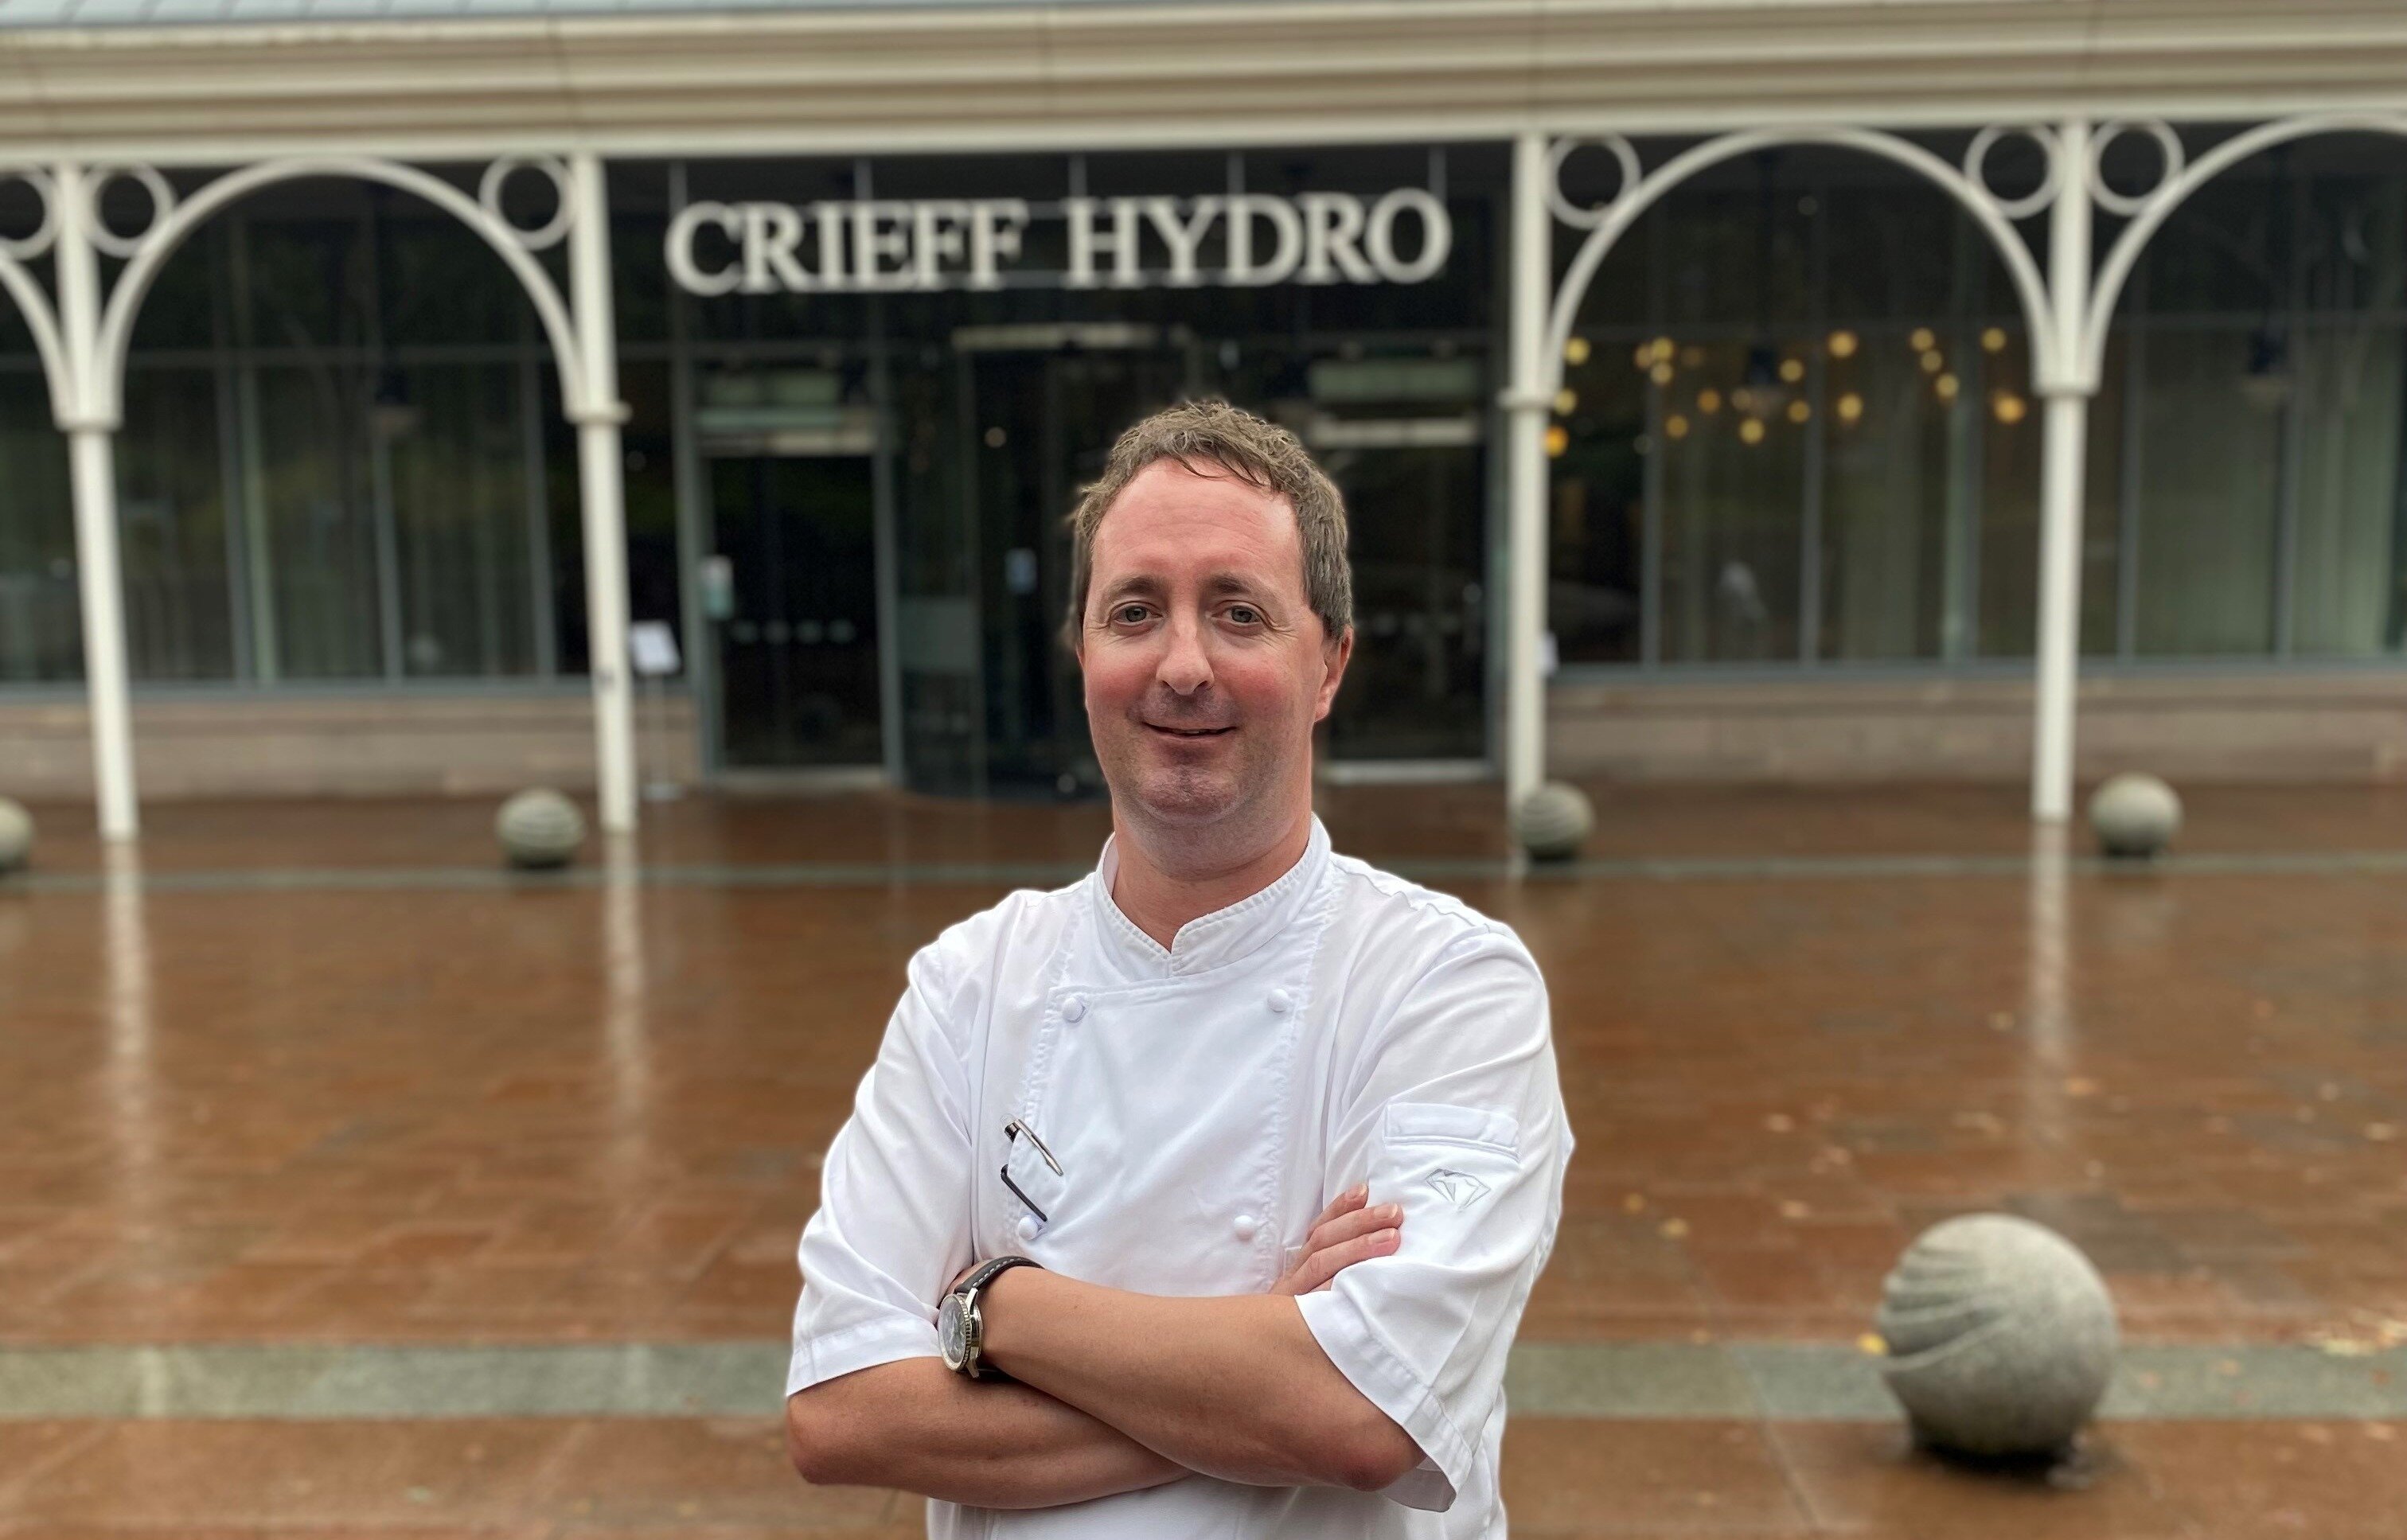 Crieff Hydro Family of Hotels appoints group executive chef